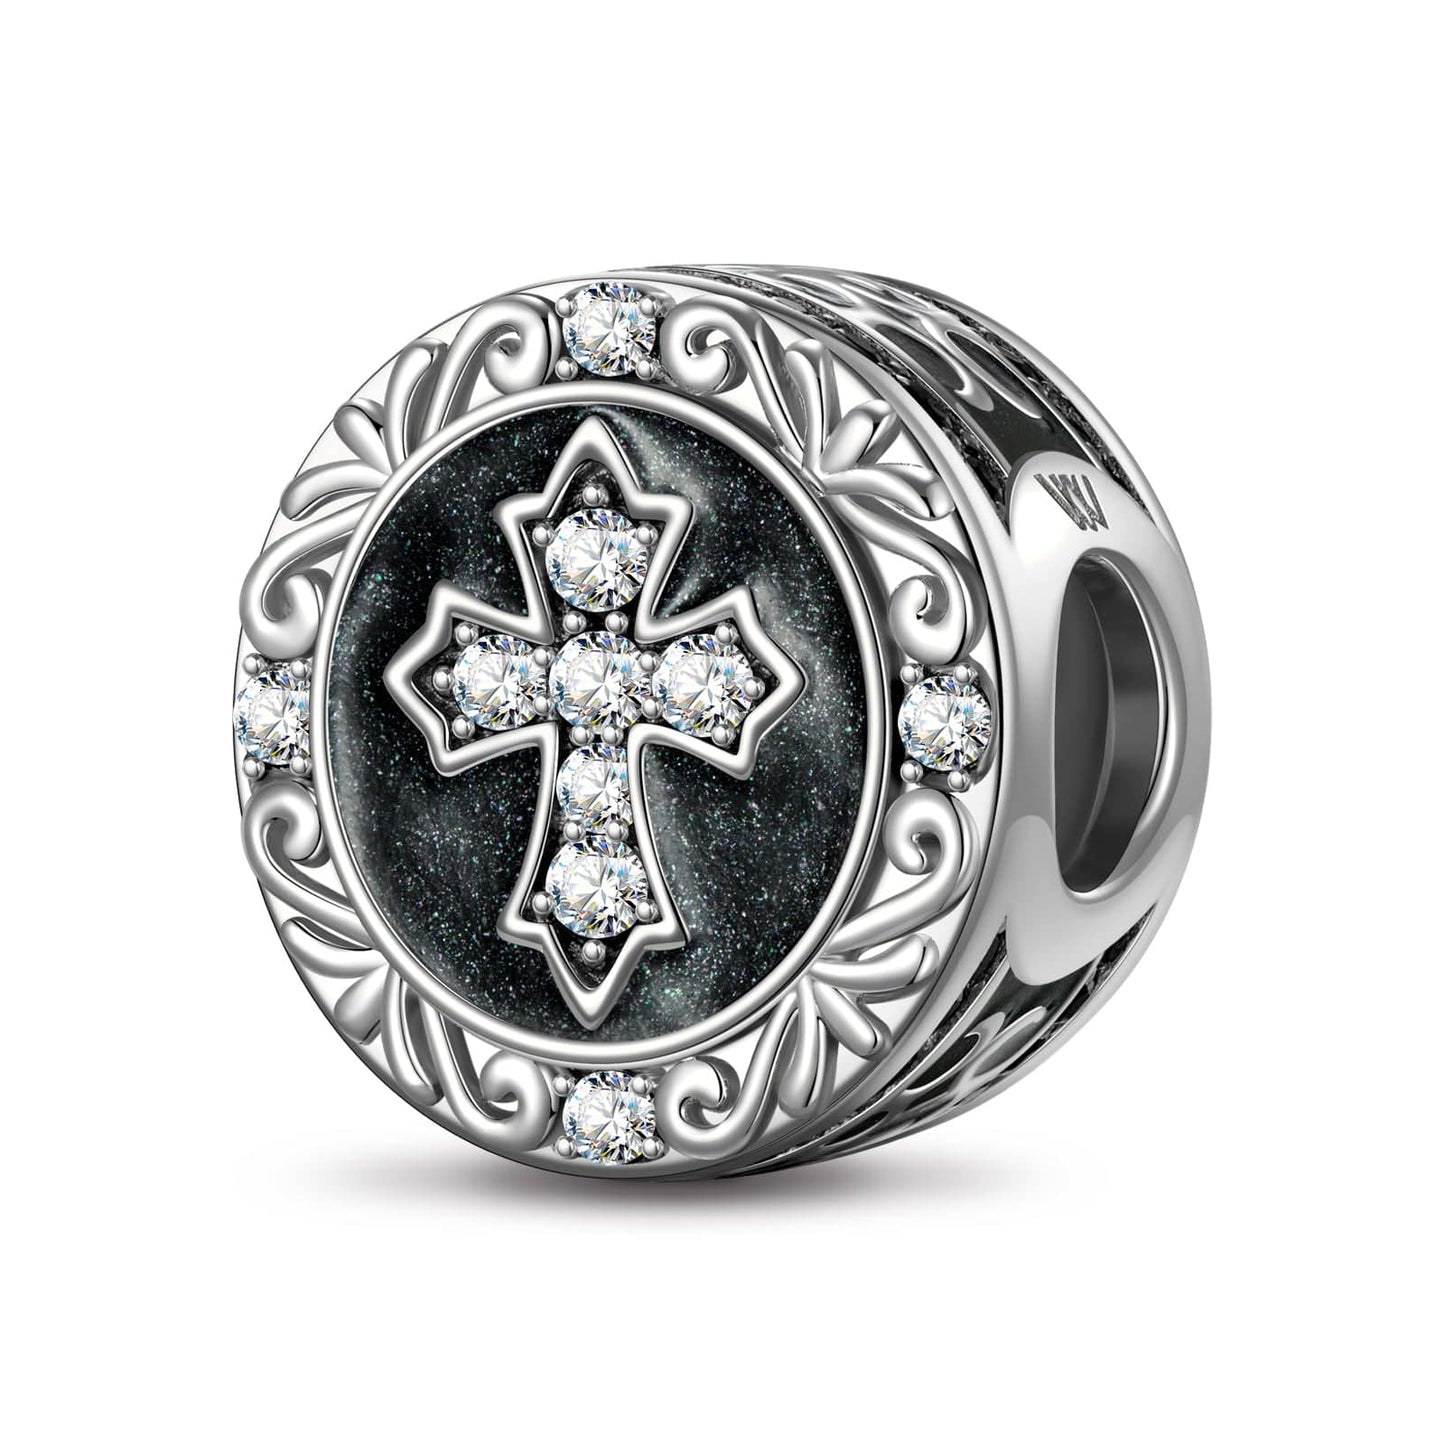 XL Size Imperial Medal Tarnish-resistant Silver Charms With Enamel In White Gold Plated For Men